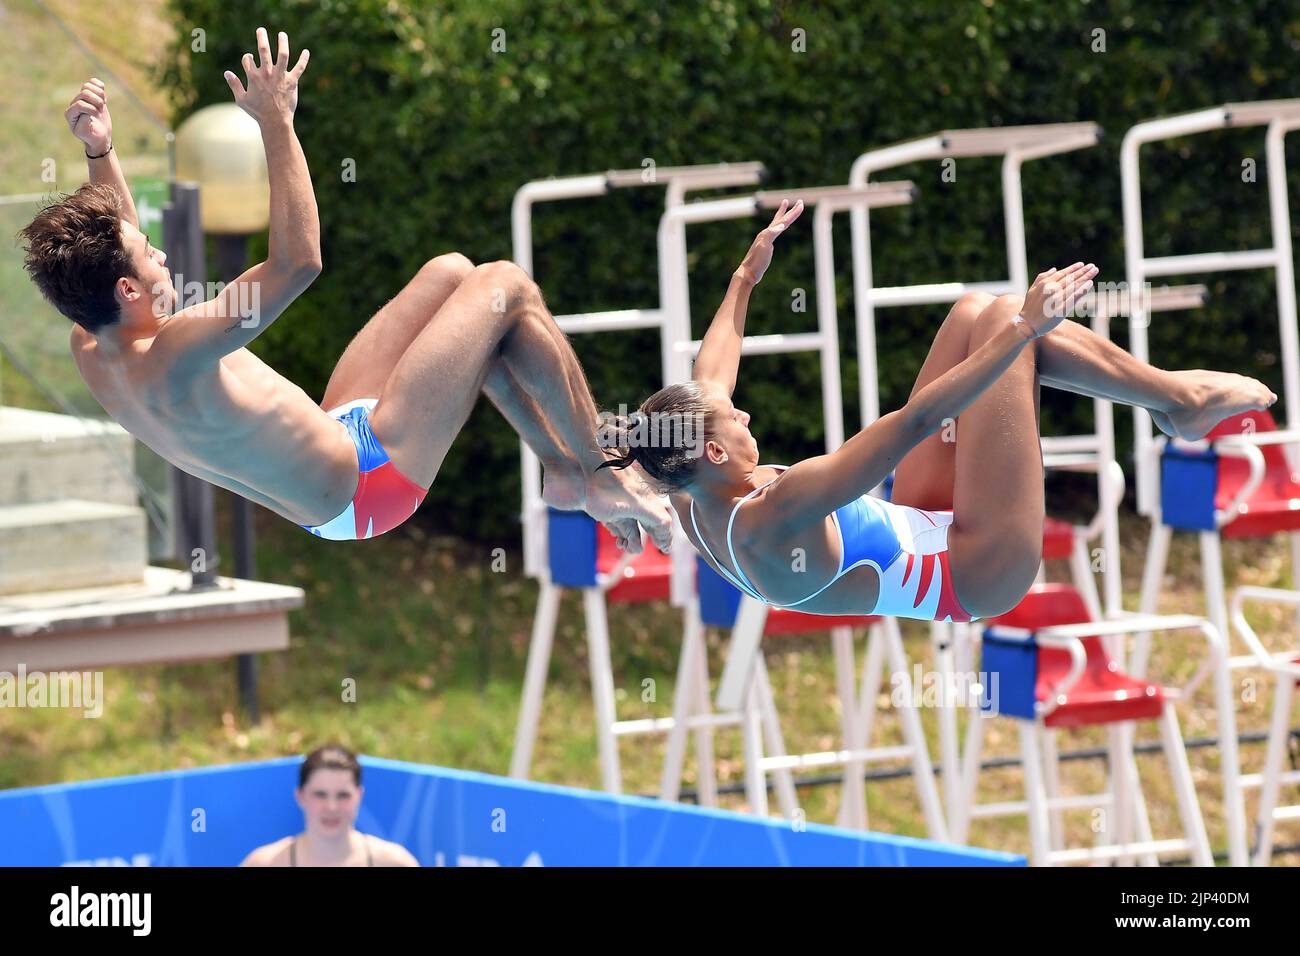 15th August 2022. Foro Italico, Rome, Italy; European Swimming Championships Rome 2022: Jules Bouyer, Nais Gillet (Fra) 3m mixed springboard Stock Photo